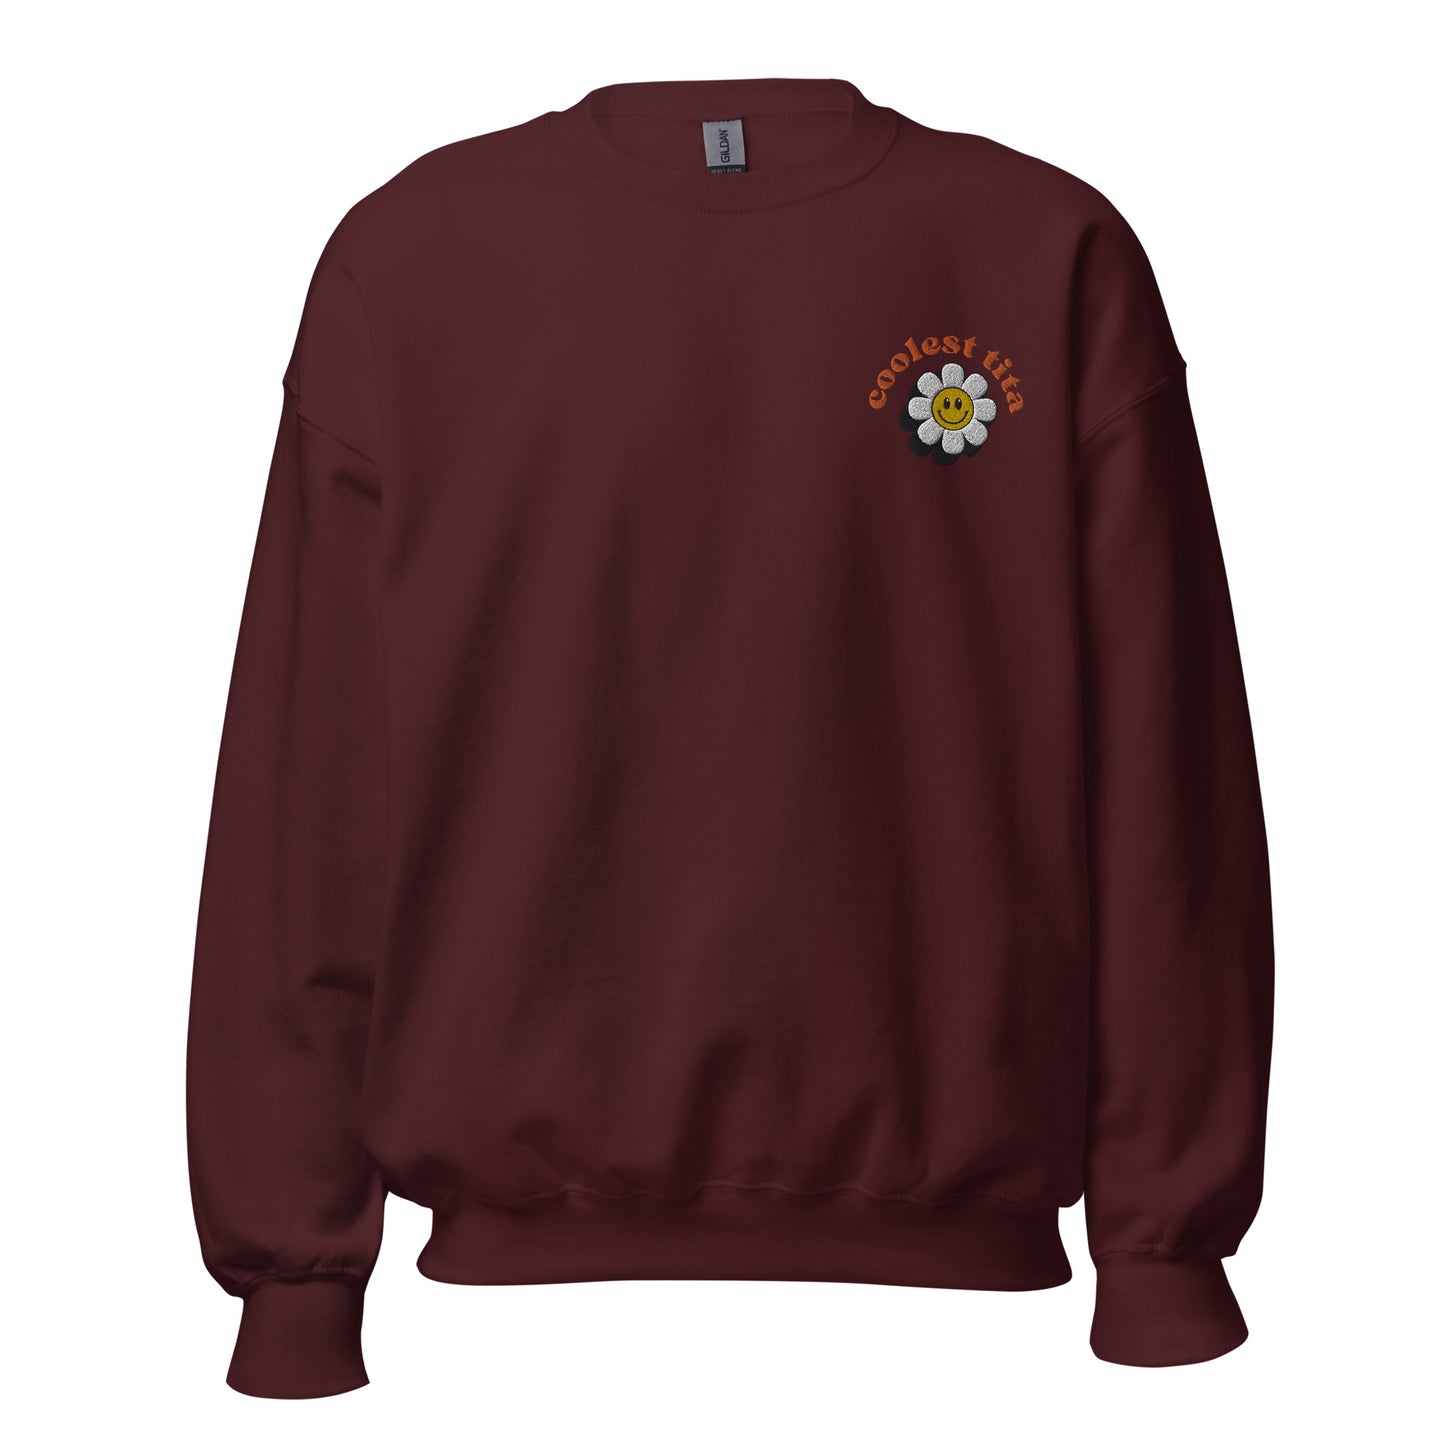 Filipino Sweatshirt Coolest Tita Smiley Embroidered Crew Neck in color variant Maroon